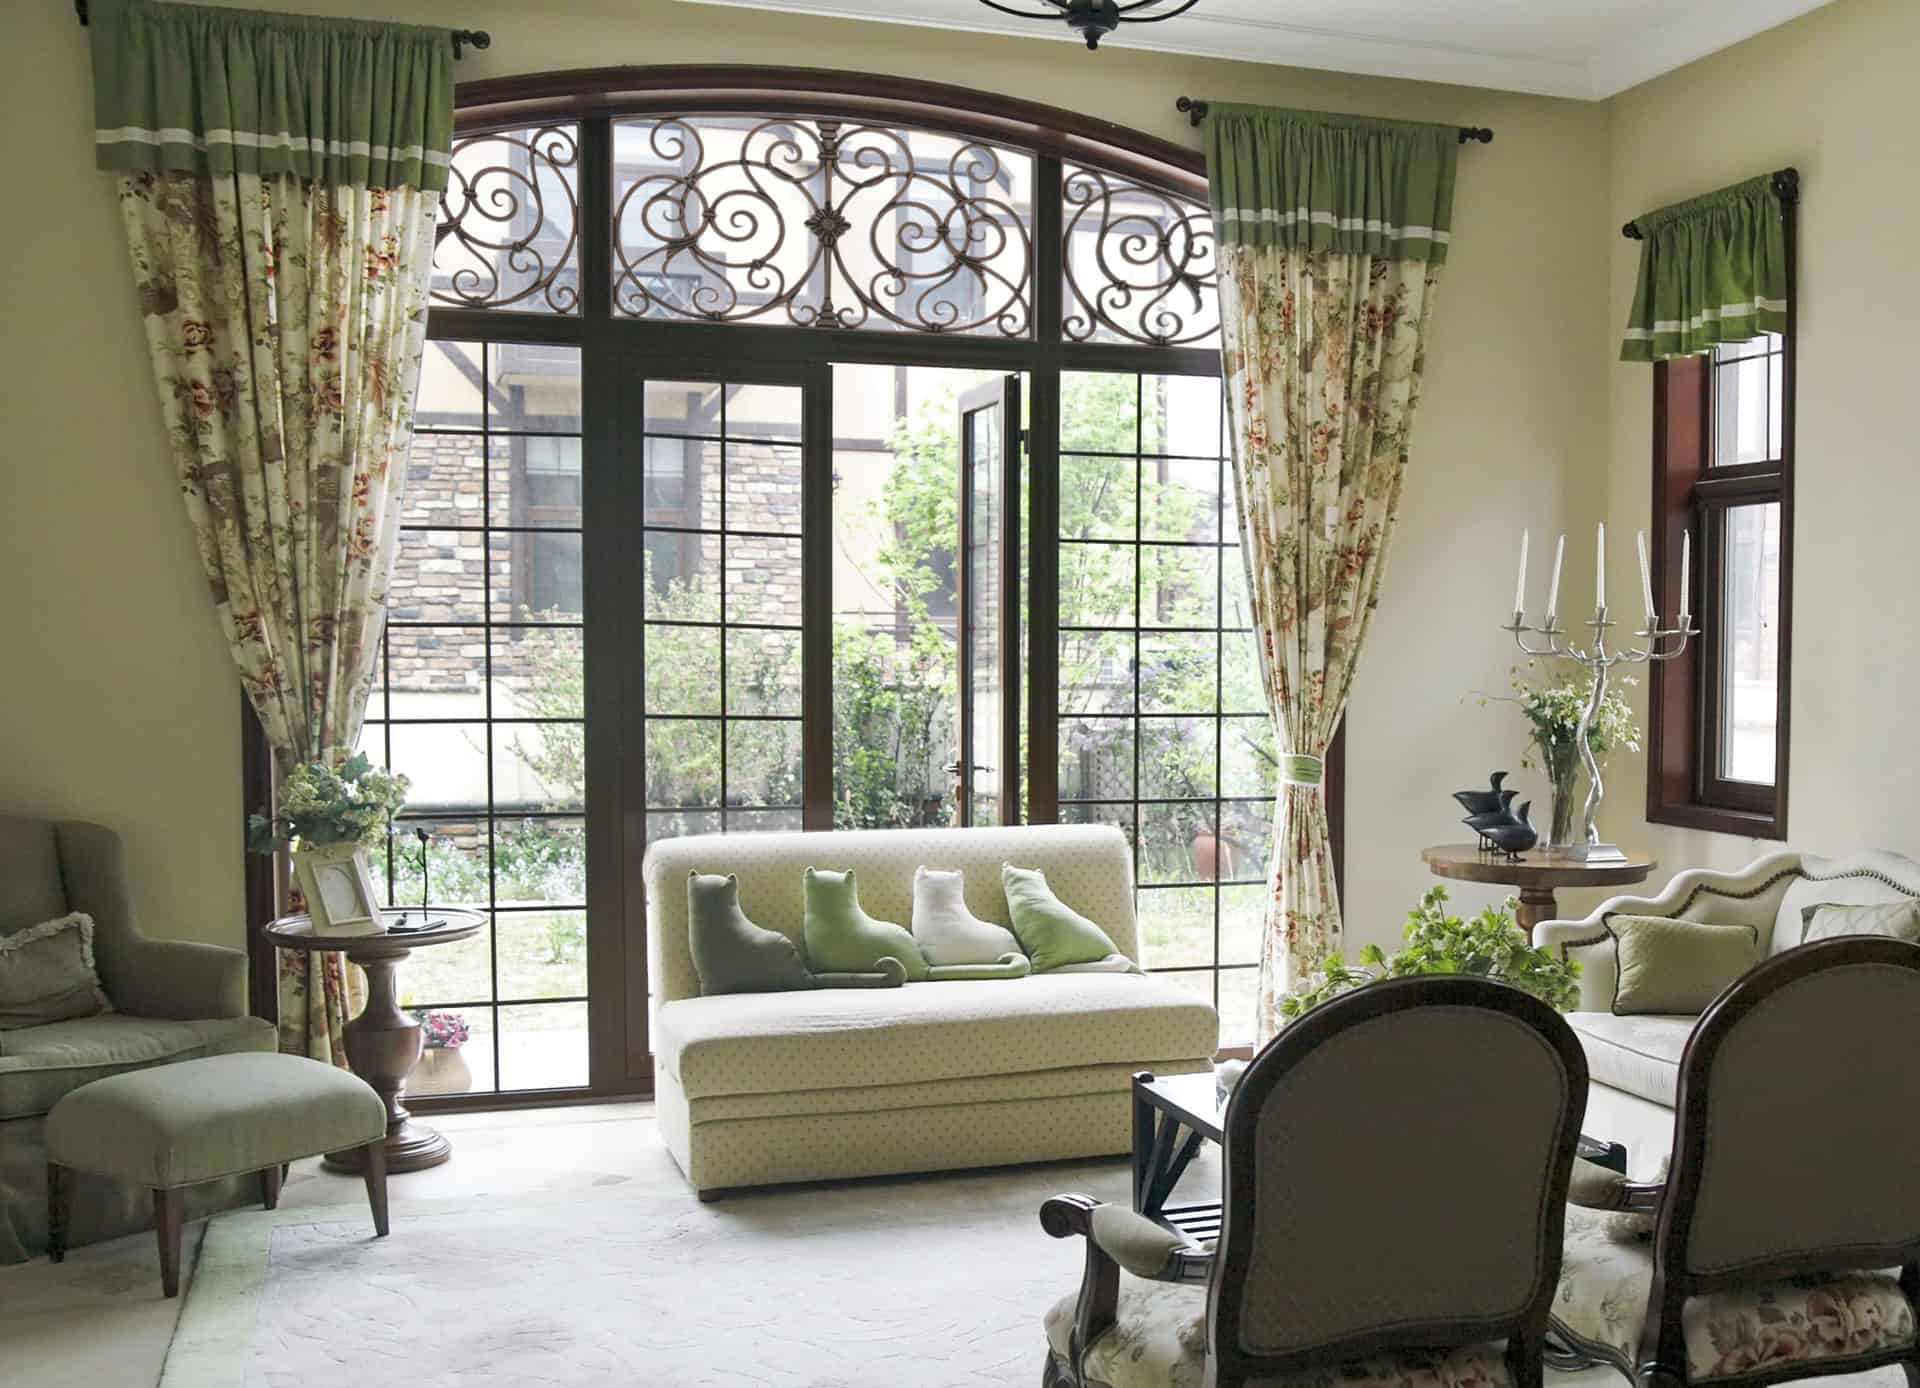 tableaux-decorative-grilles-residential-home-decor-interior-decorating-window-treatment